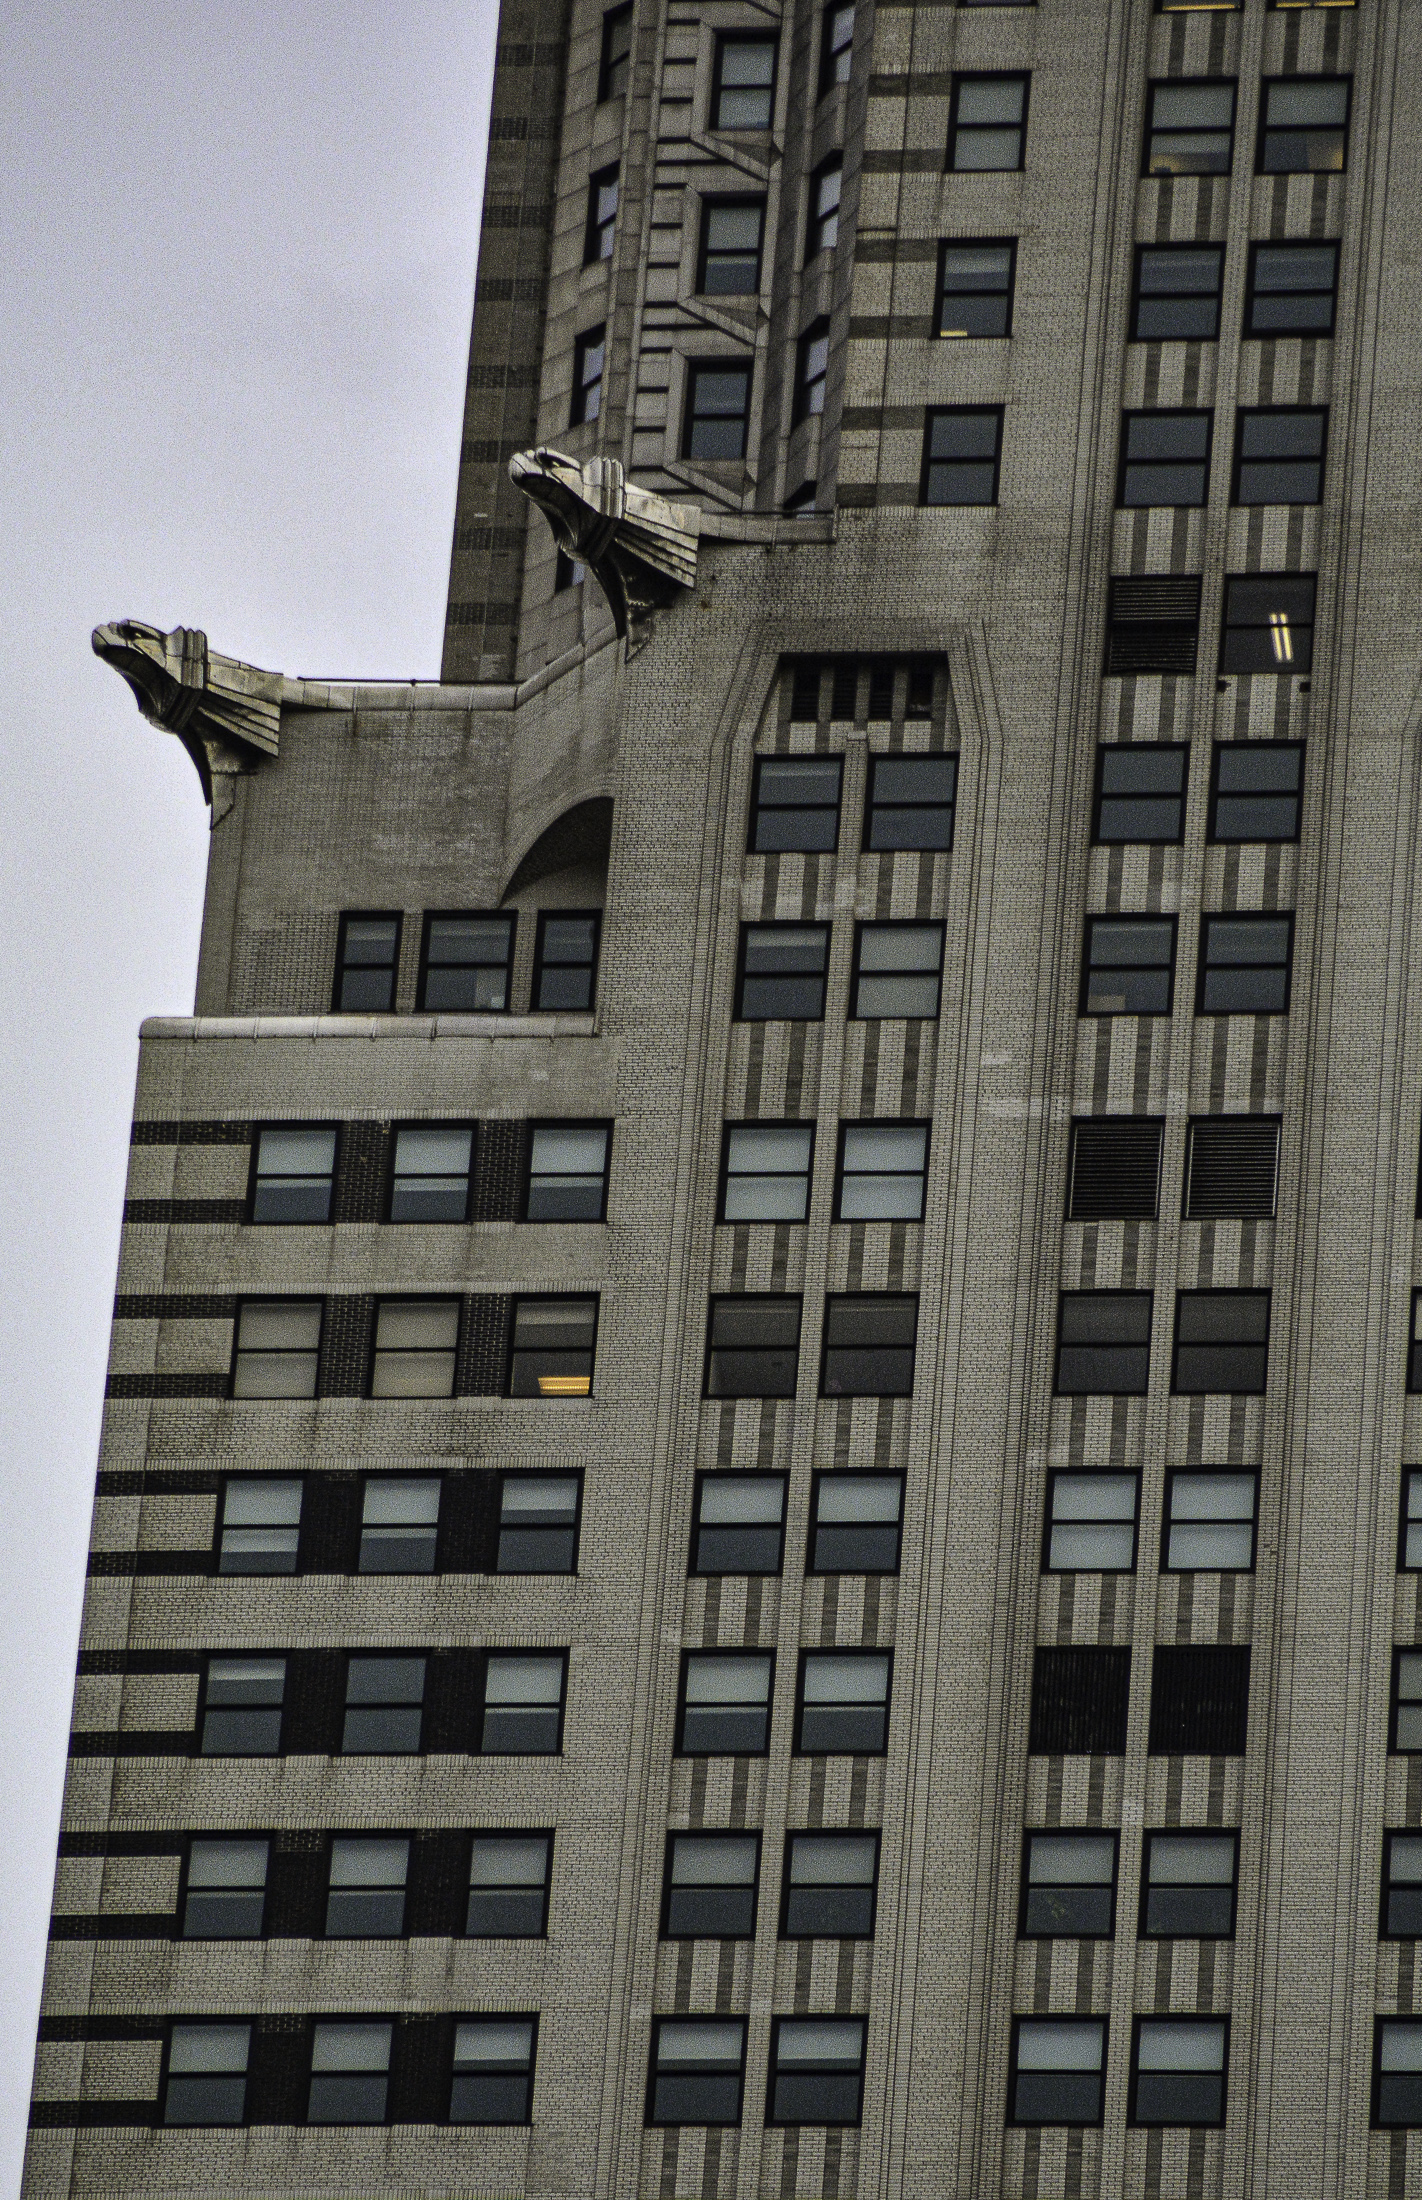 peculiarities of the Chrysler Building...